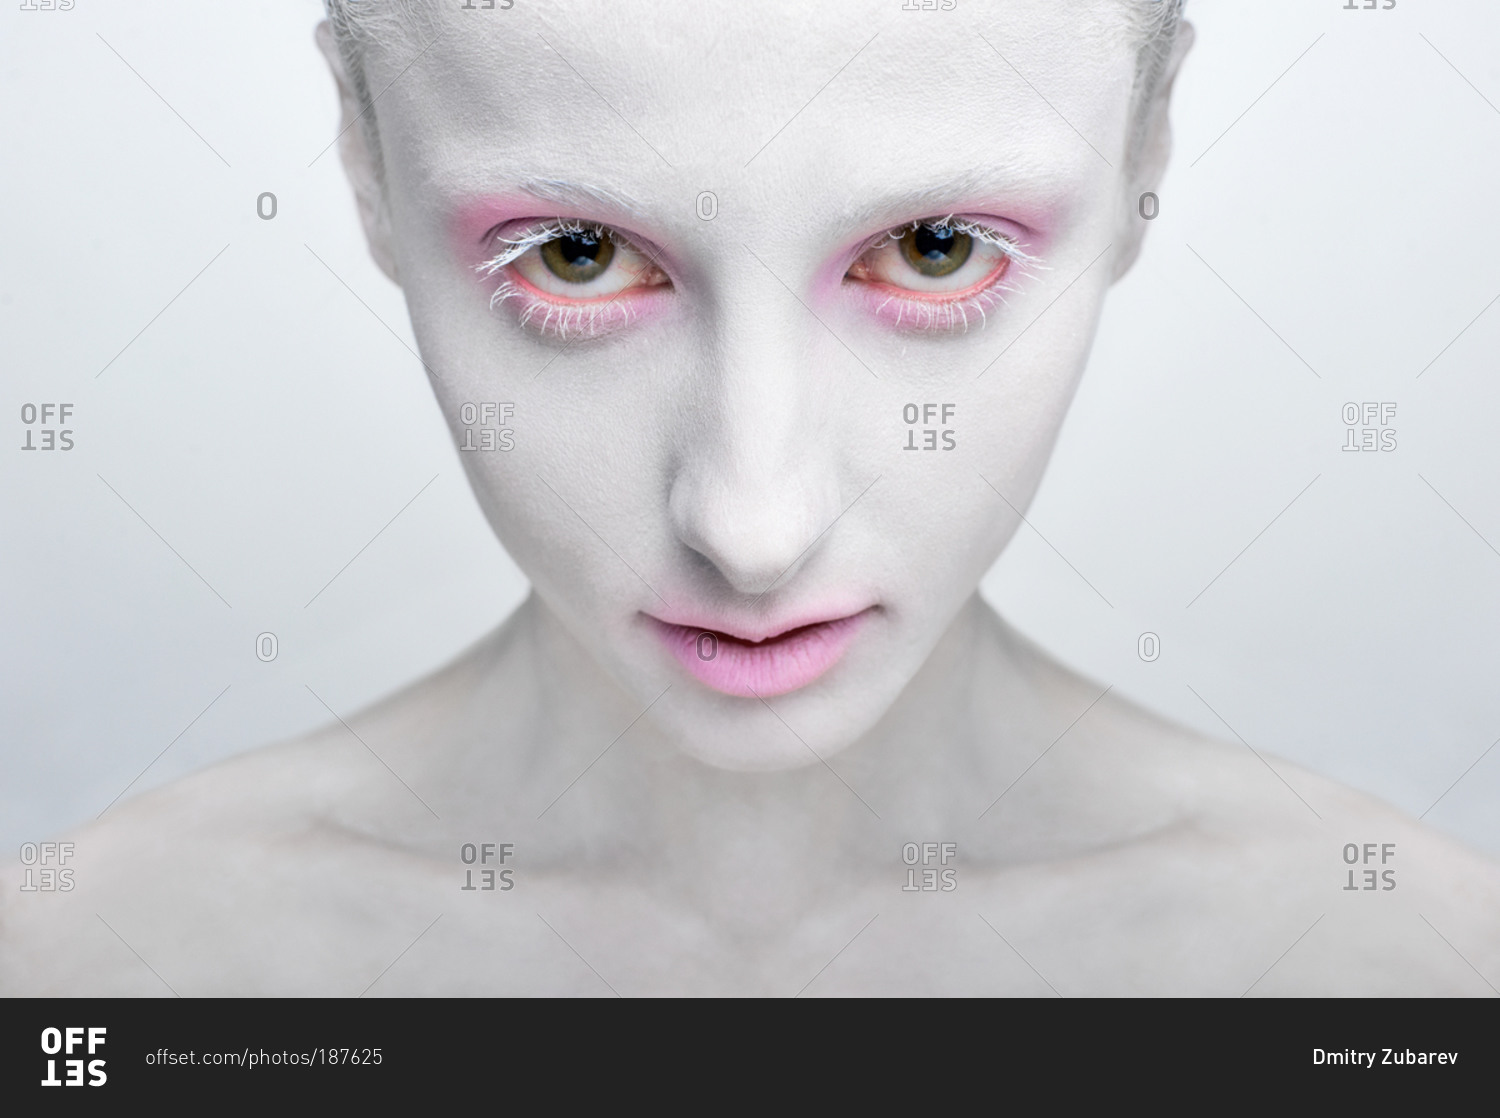 Portrait of a woman with white face painting stock photo - OFFSET